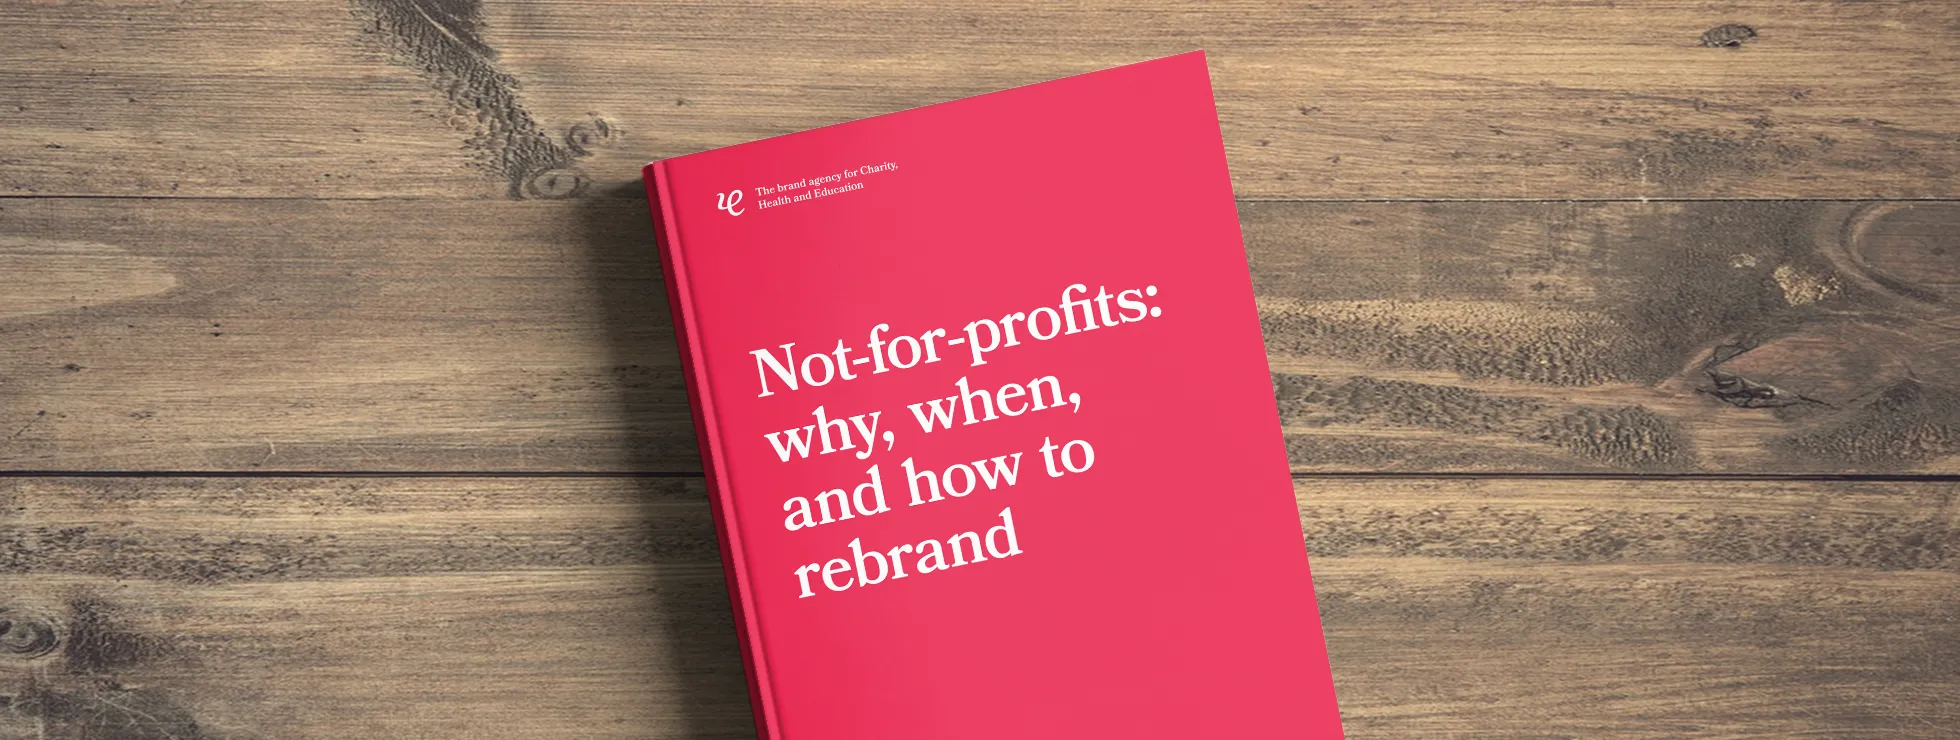 Not-for-profits: why, when, and how to rebrand